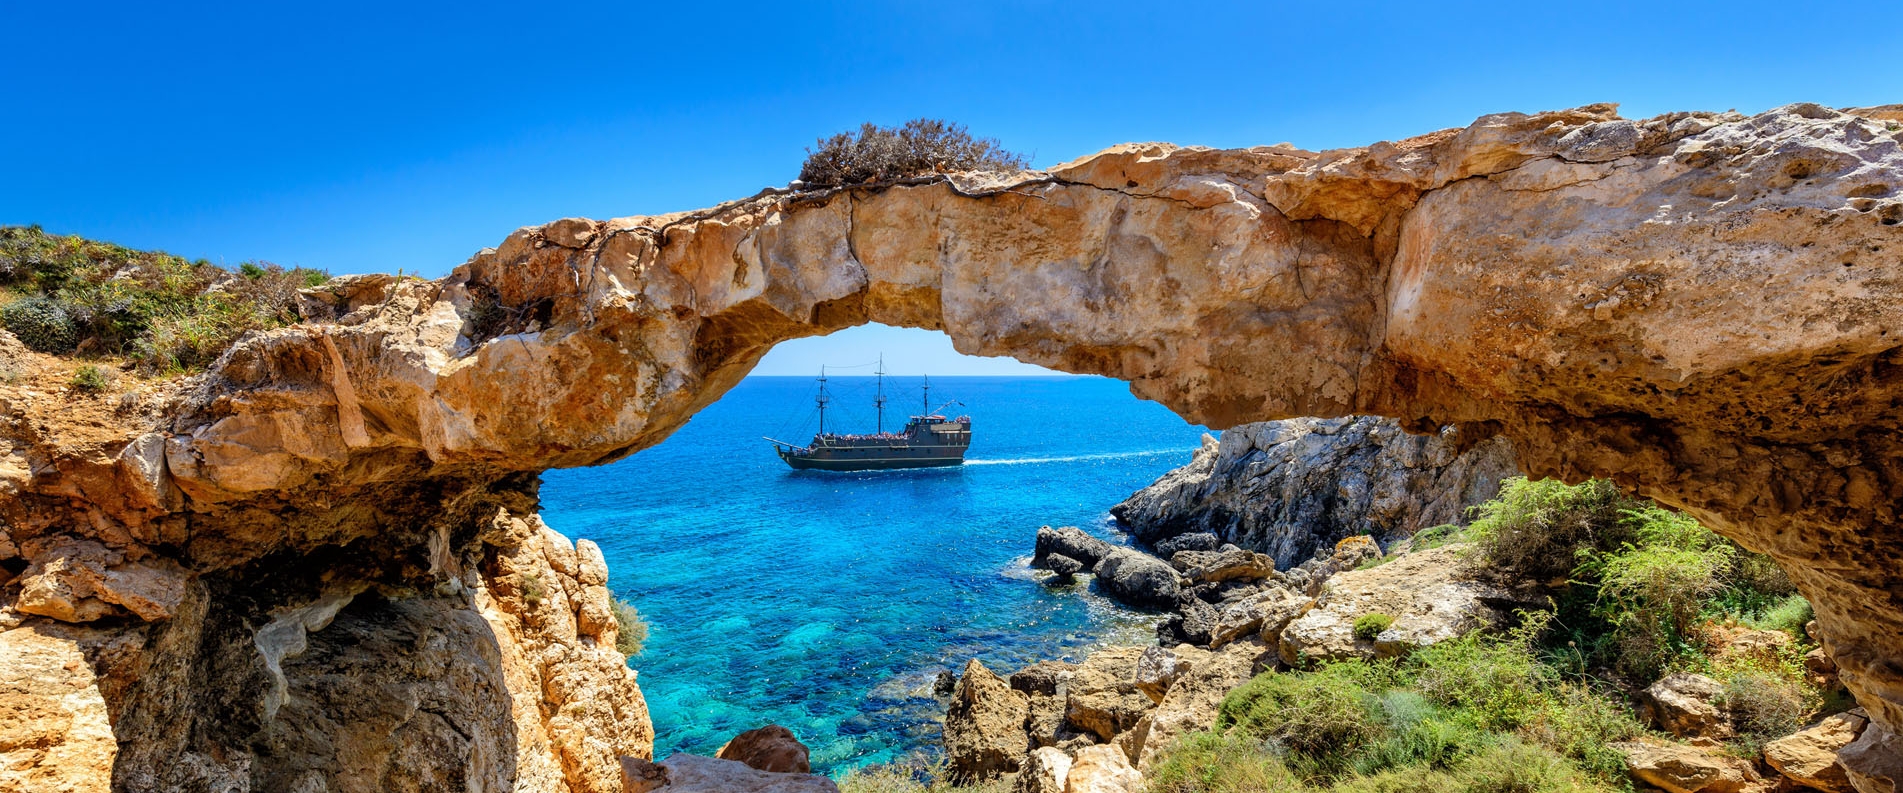 Things to do in Ayia Napa: landmarks, tourist attractions and restaurants